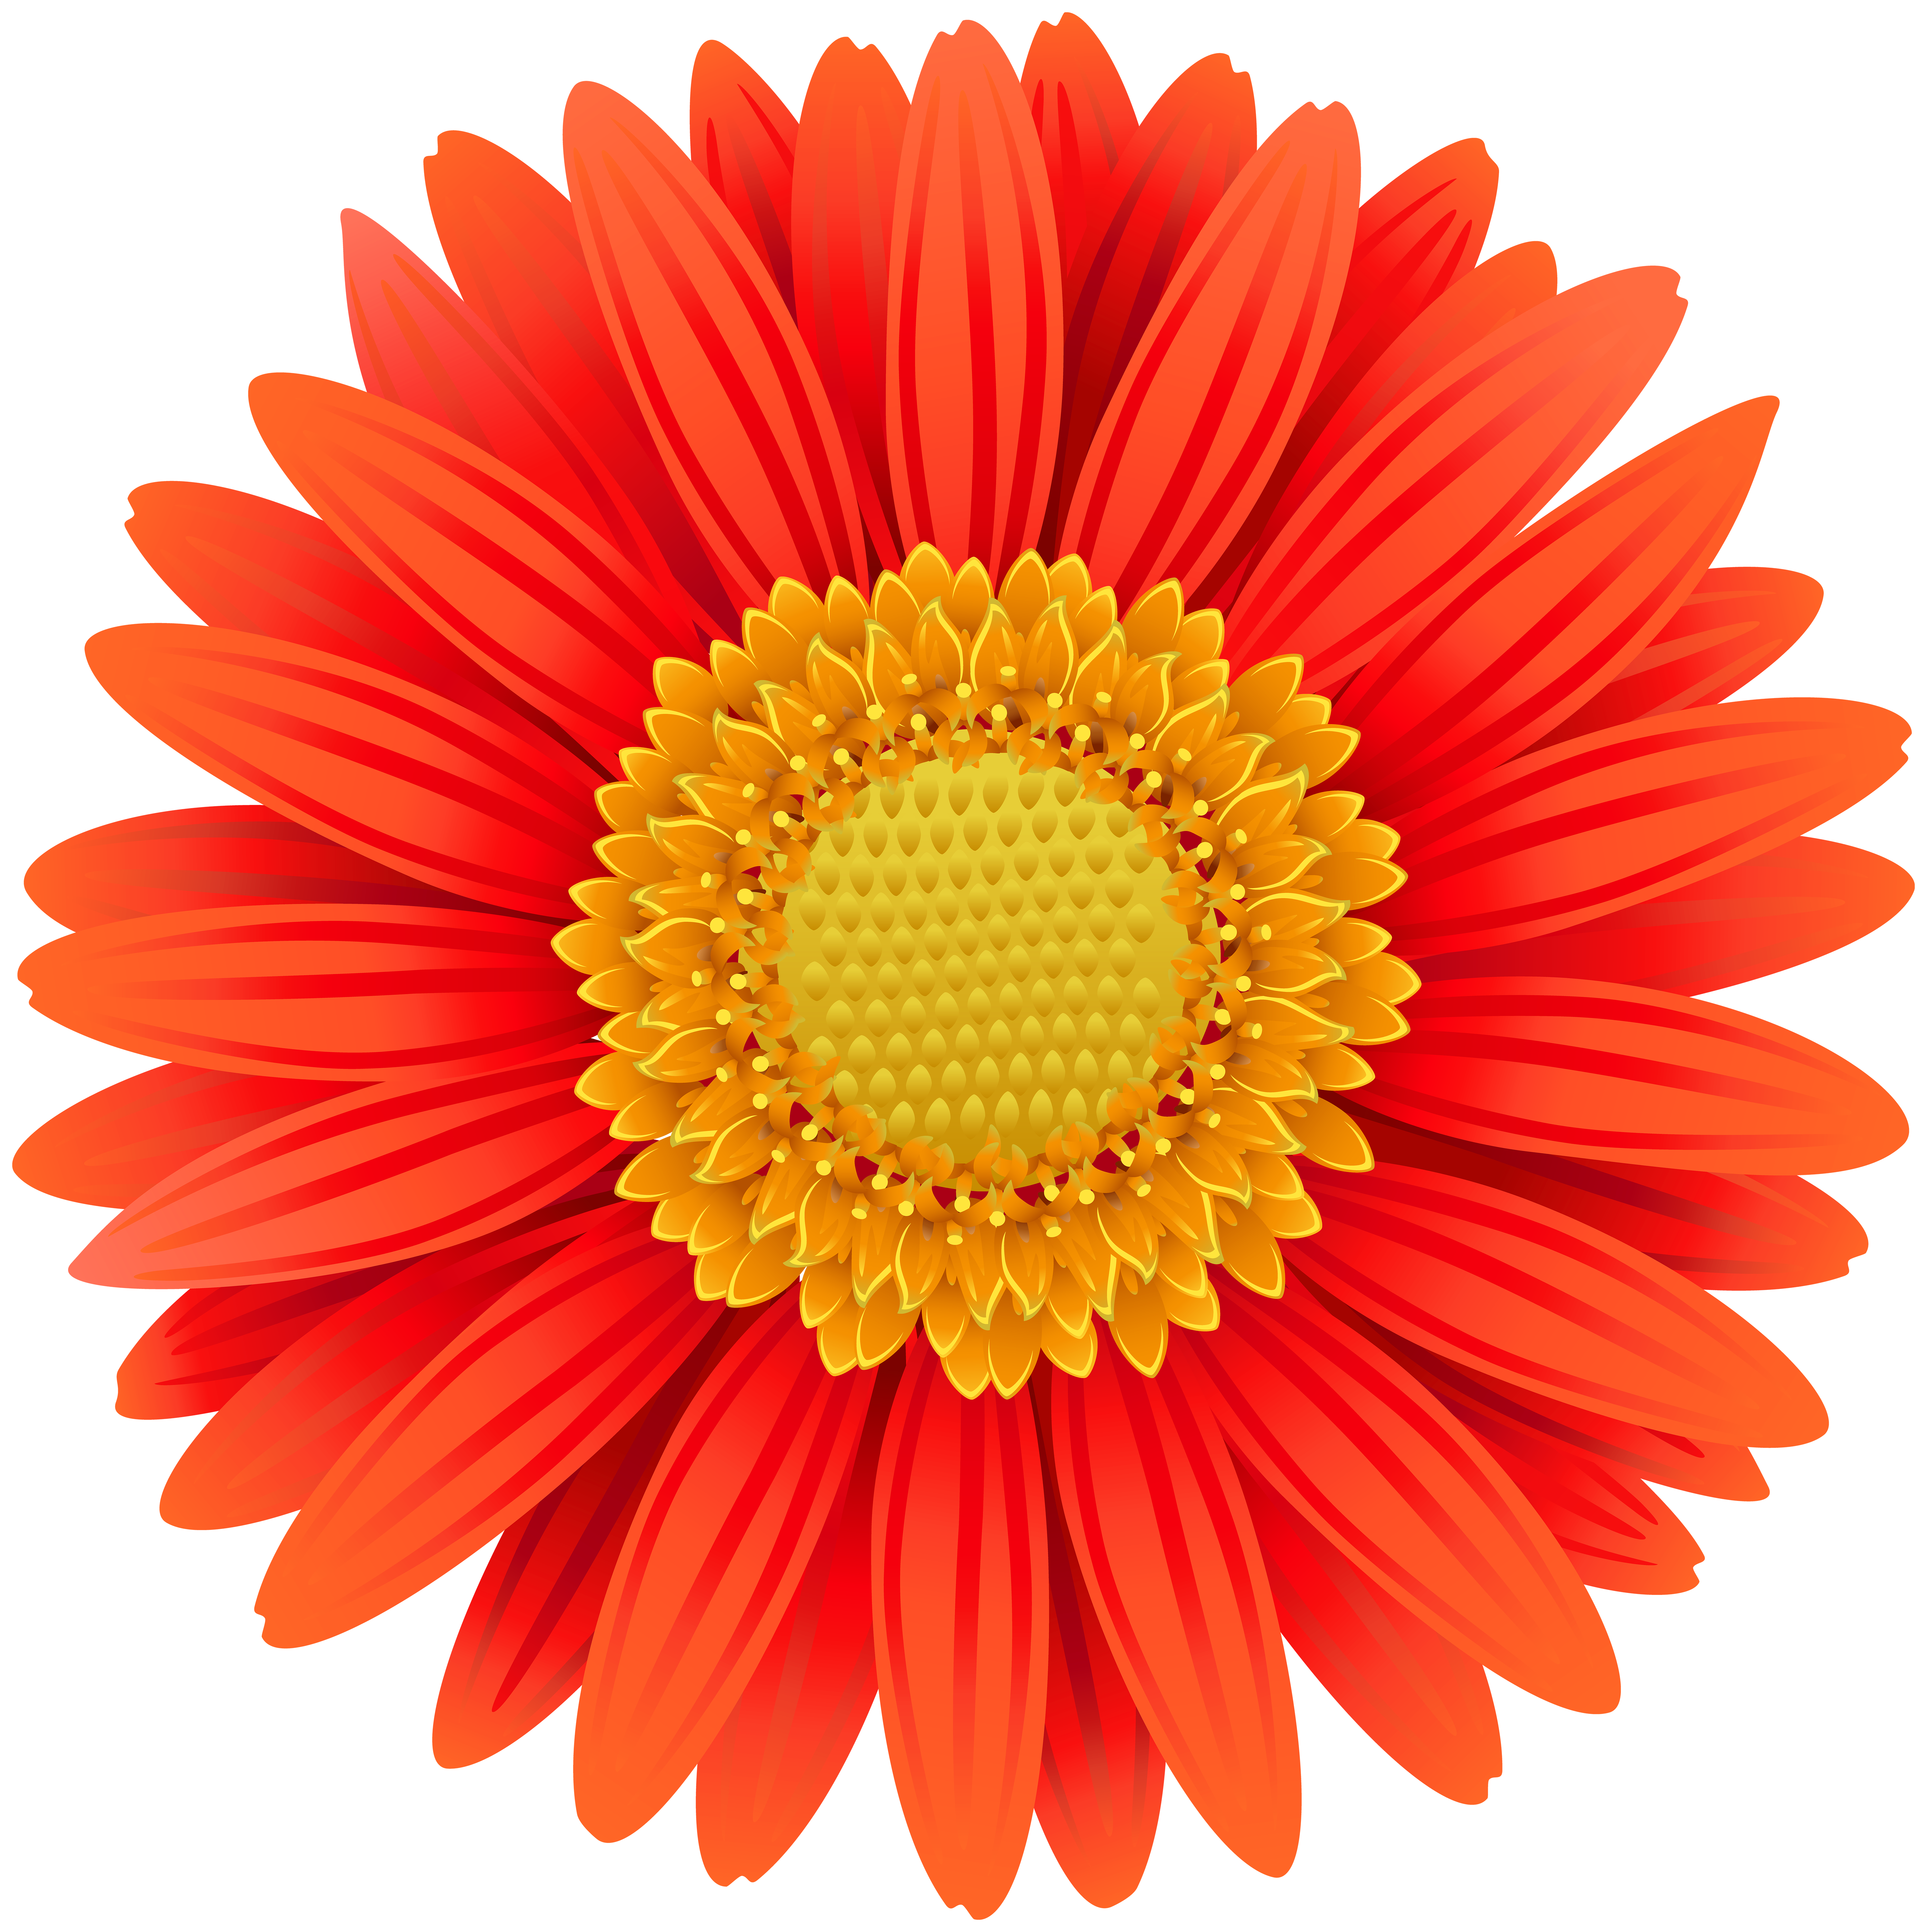 Gerber Daisy Clipart At GetDrawings Free Download.